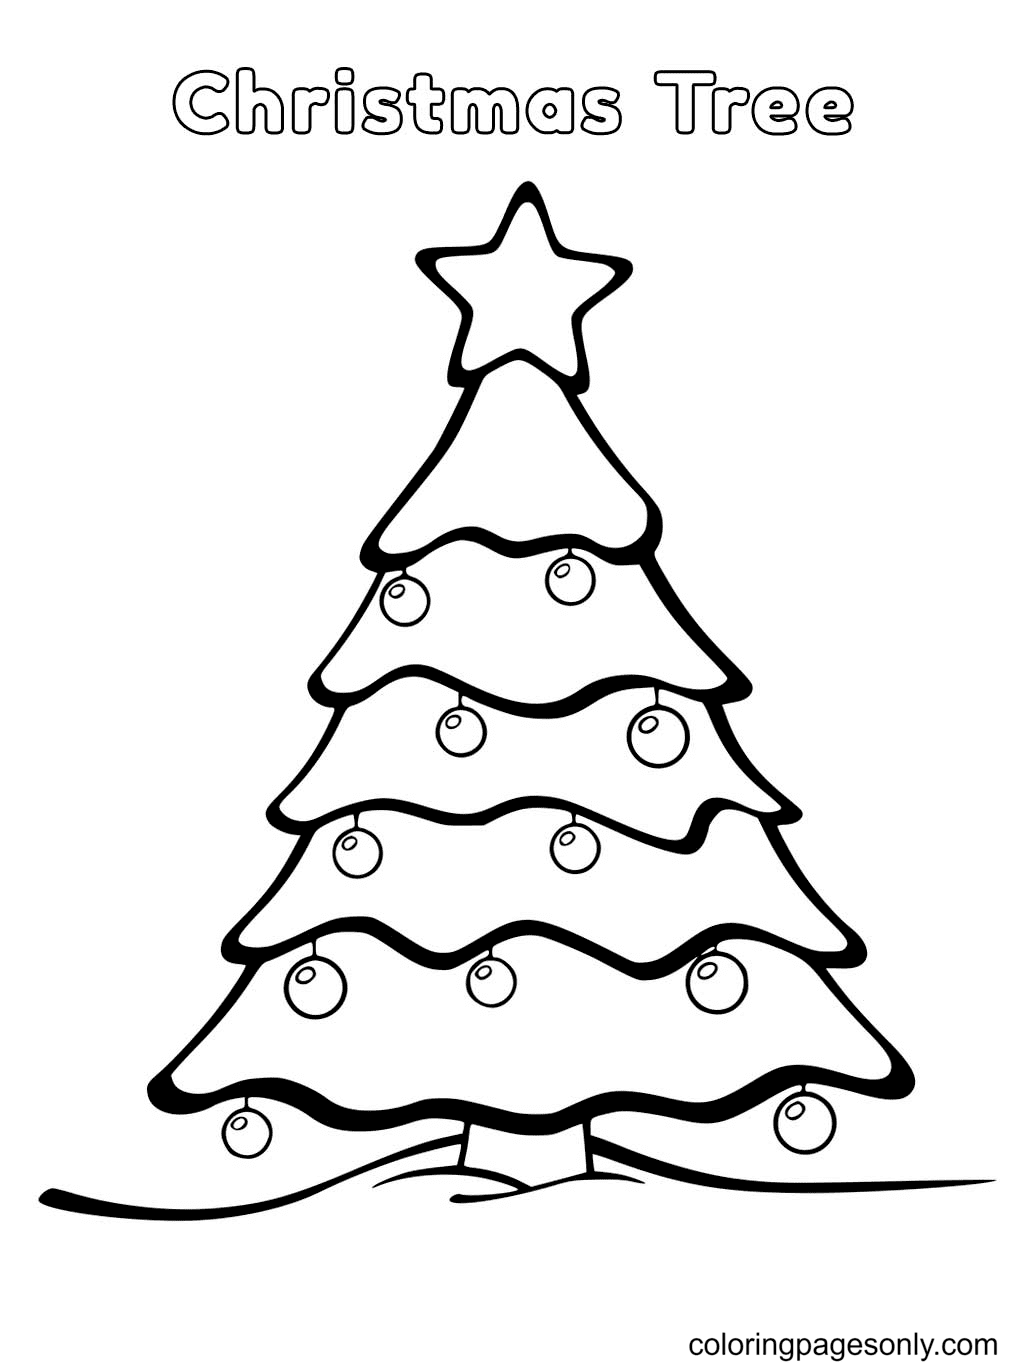 Merry Christmas Tree Coloring Pages   Christmas Tree Coloring ...